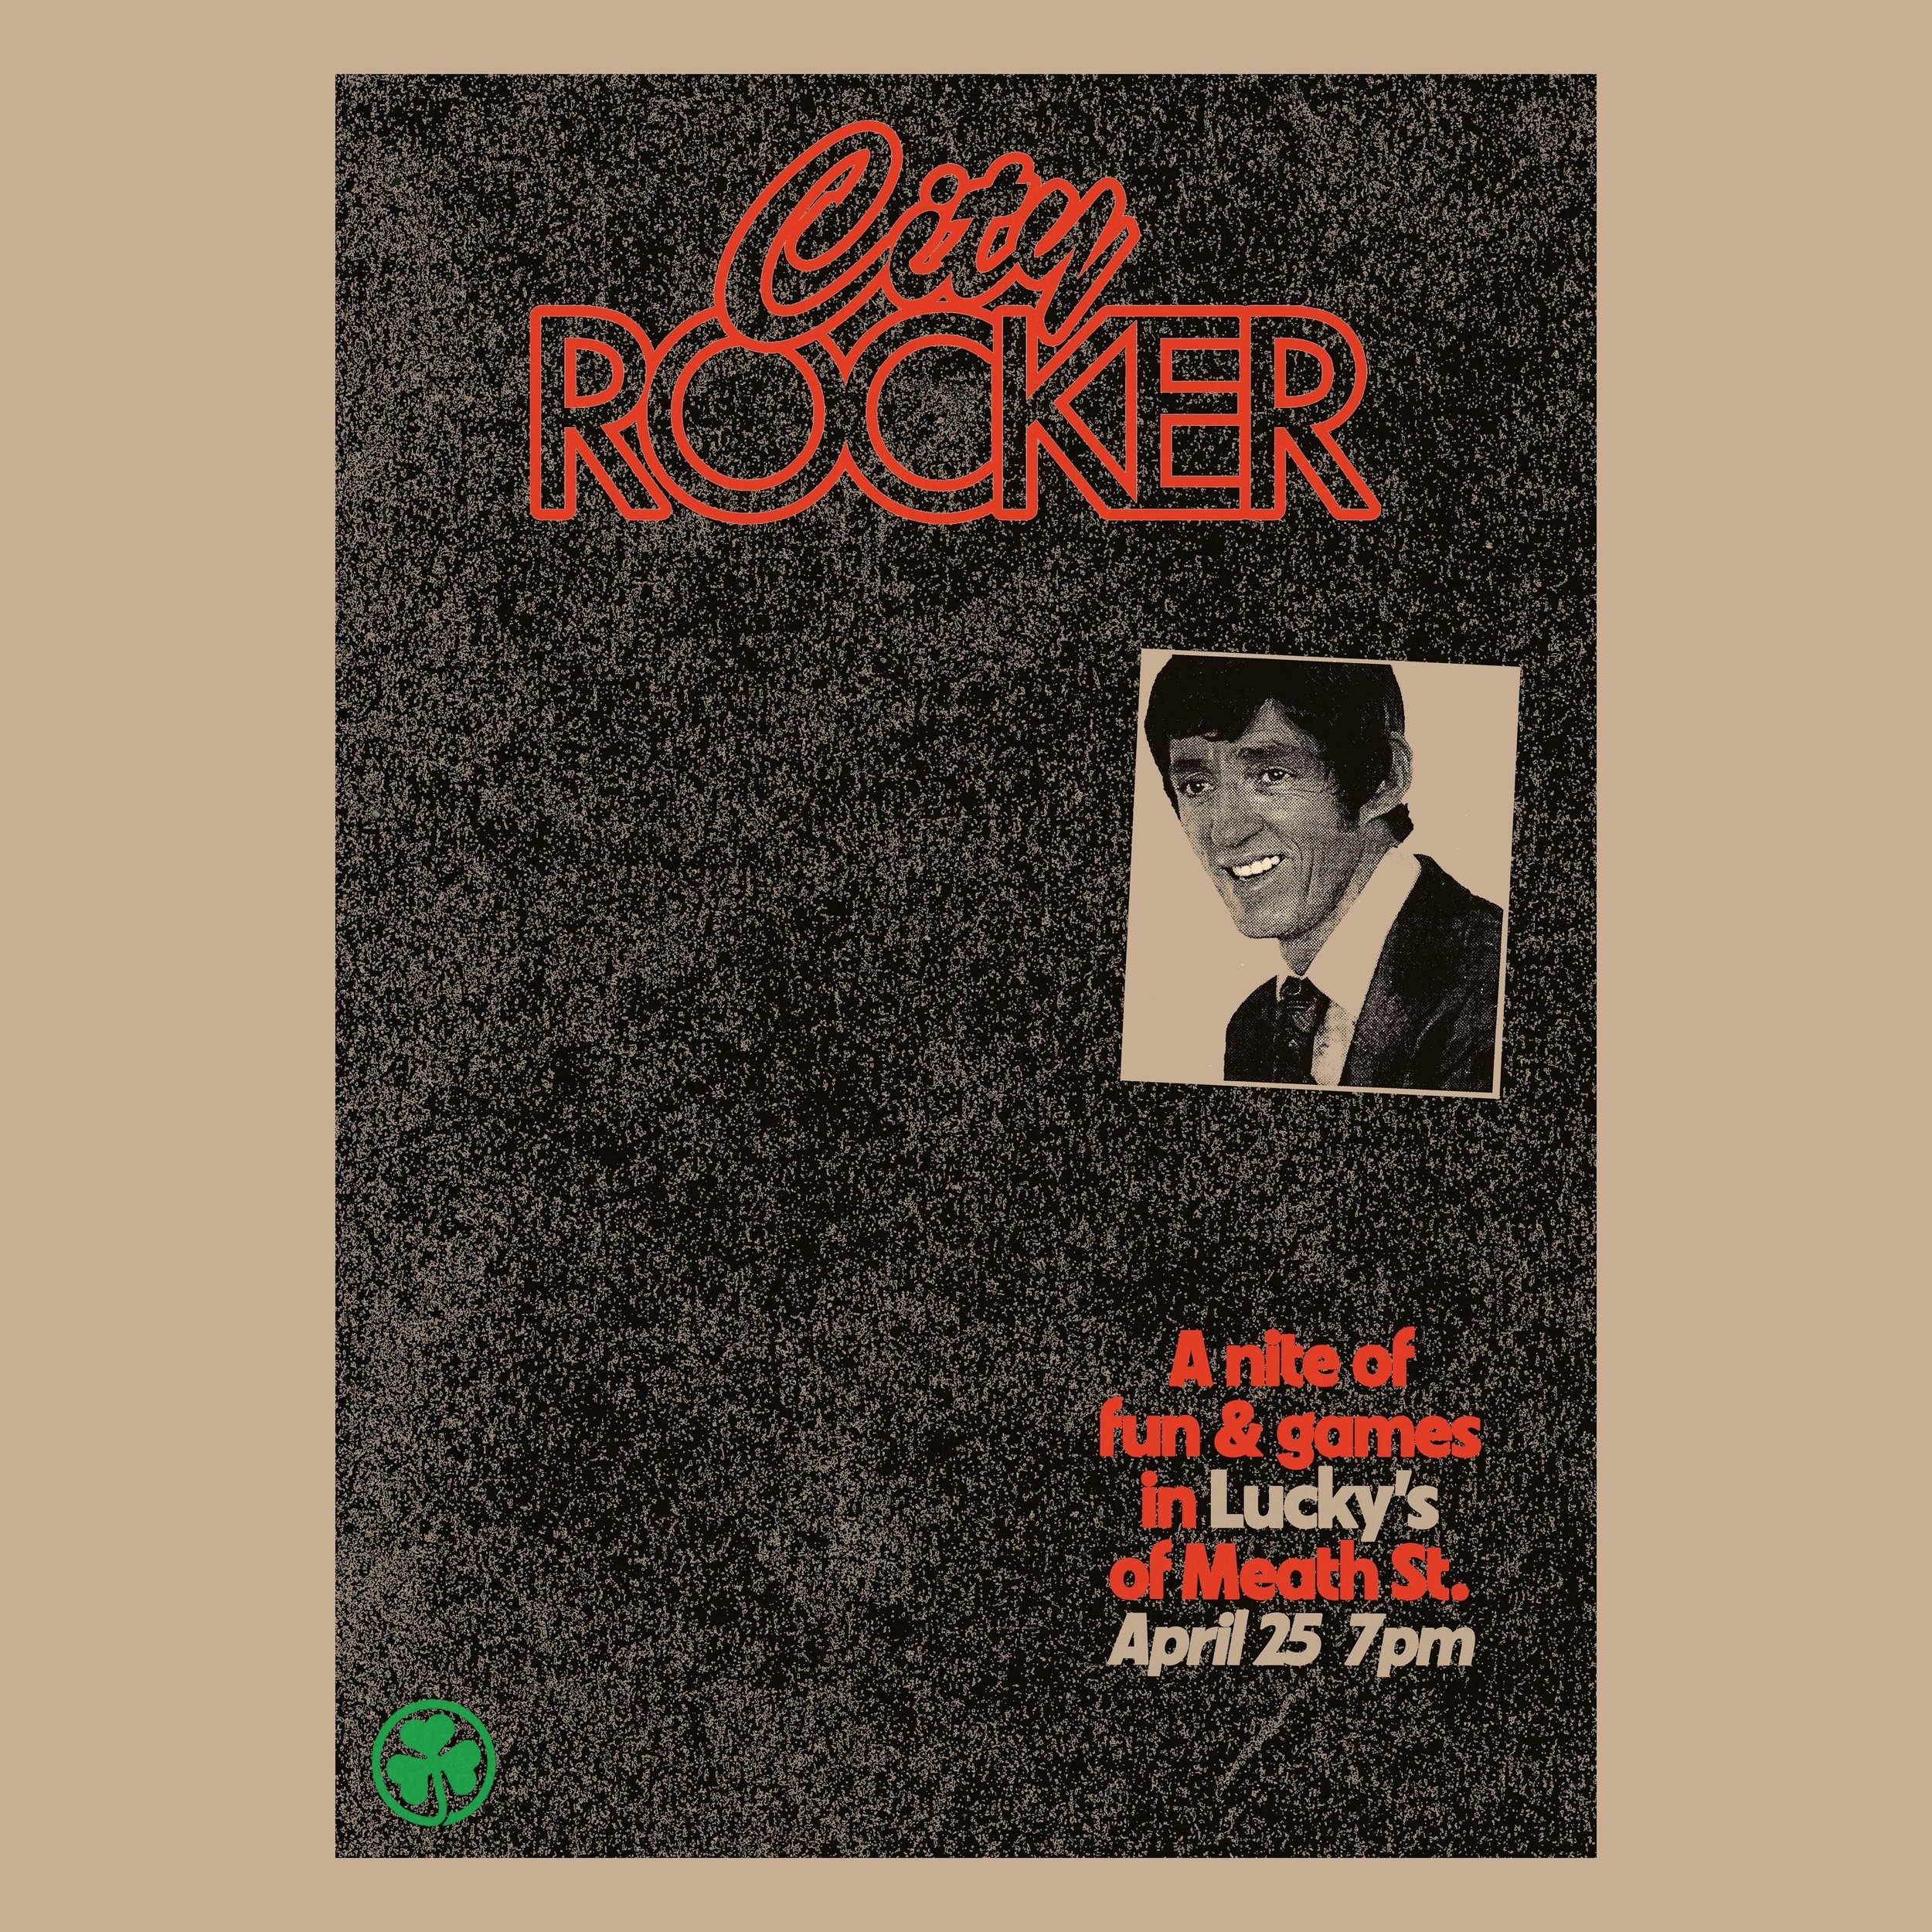 The latest edition of @cityrocker.quarterly launches at Luckys next Thursday 25th April. 

Half tour guide, half diary, half scrapbook, half cookbook, half harmless disinformation pamphlet. 
You won&rsquo;t get it &lsquo;til you get it!

Get in early